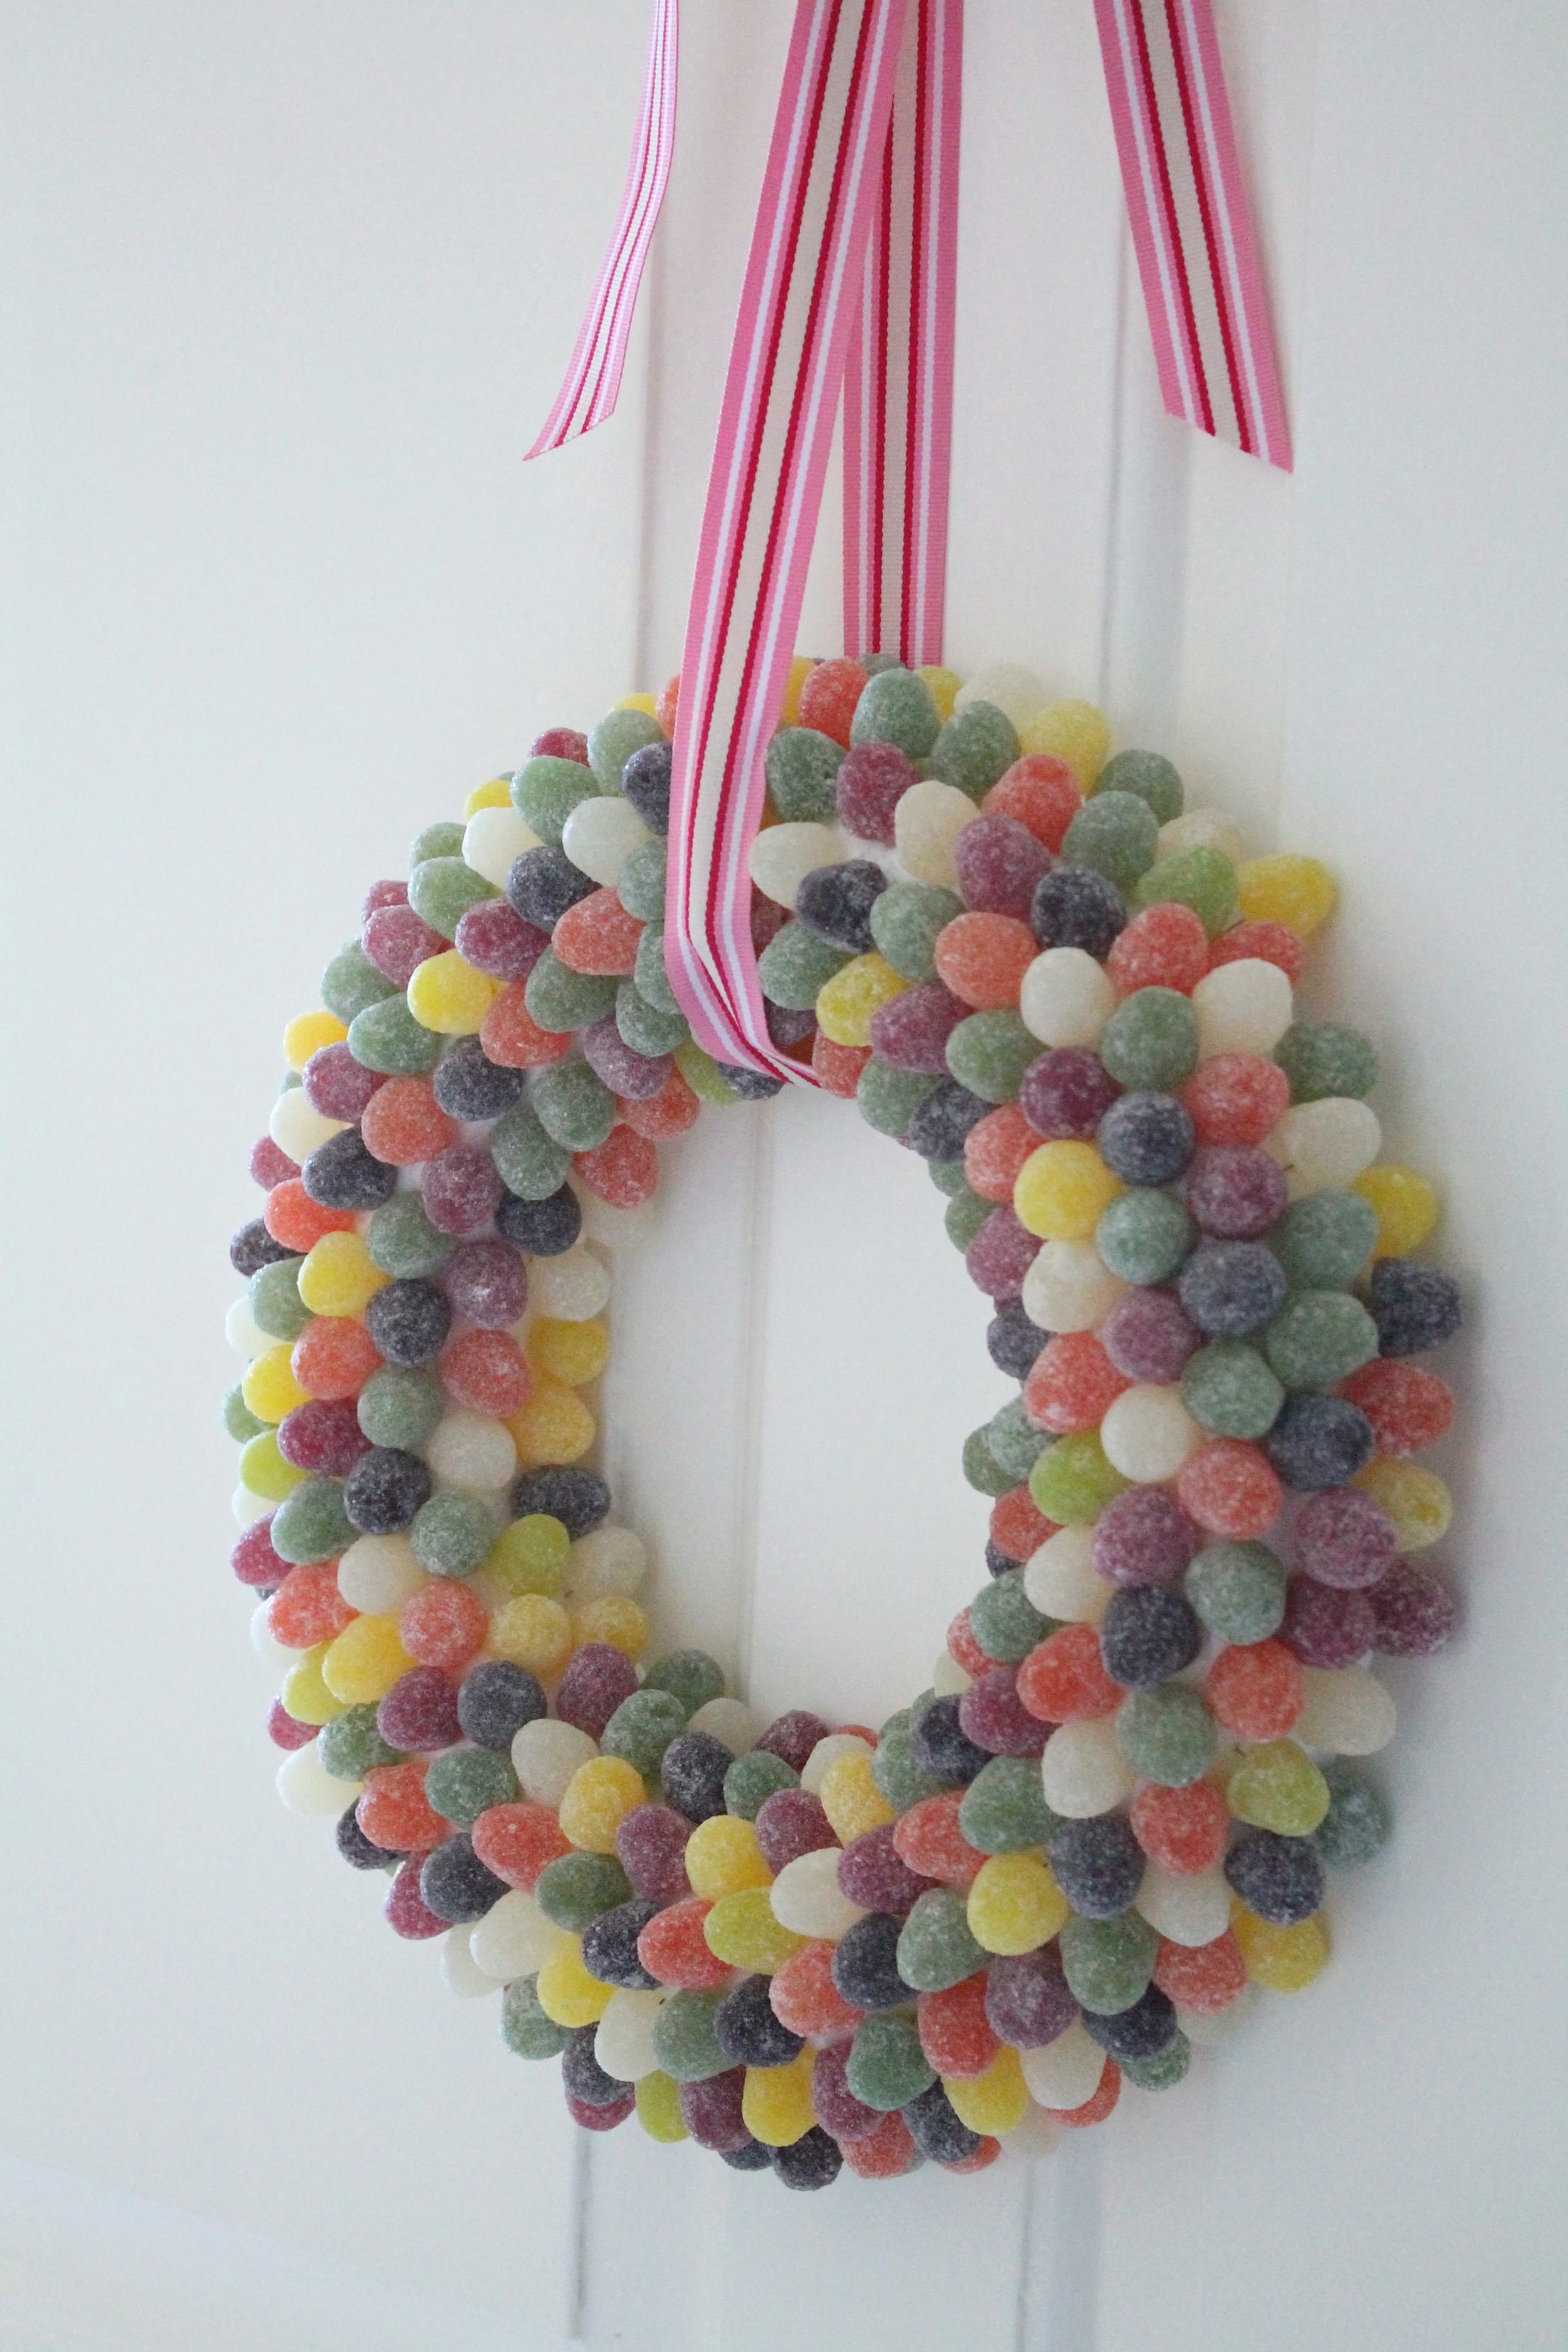 gumdrops-sweet-wreath-styled-and-photographed-by-little-big-bell